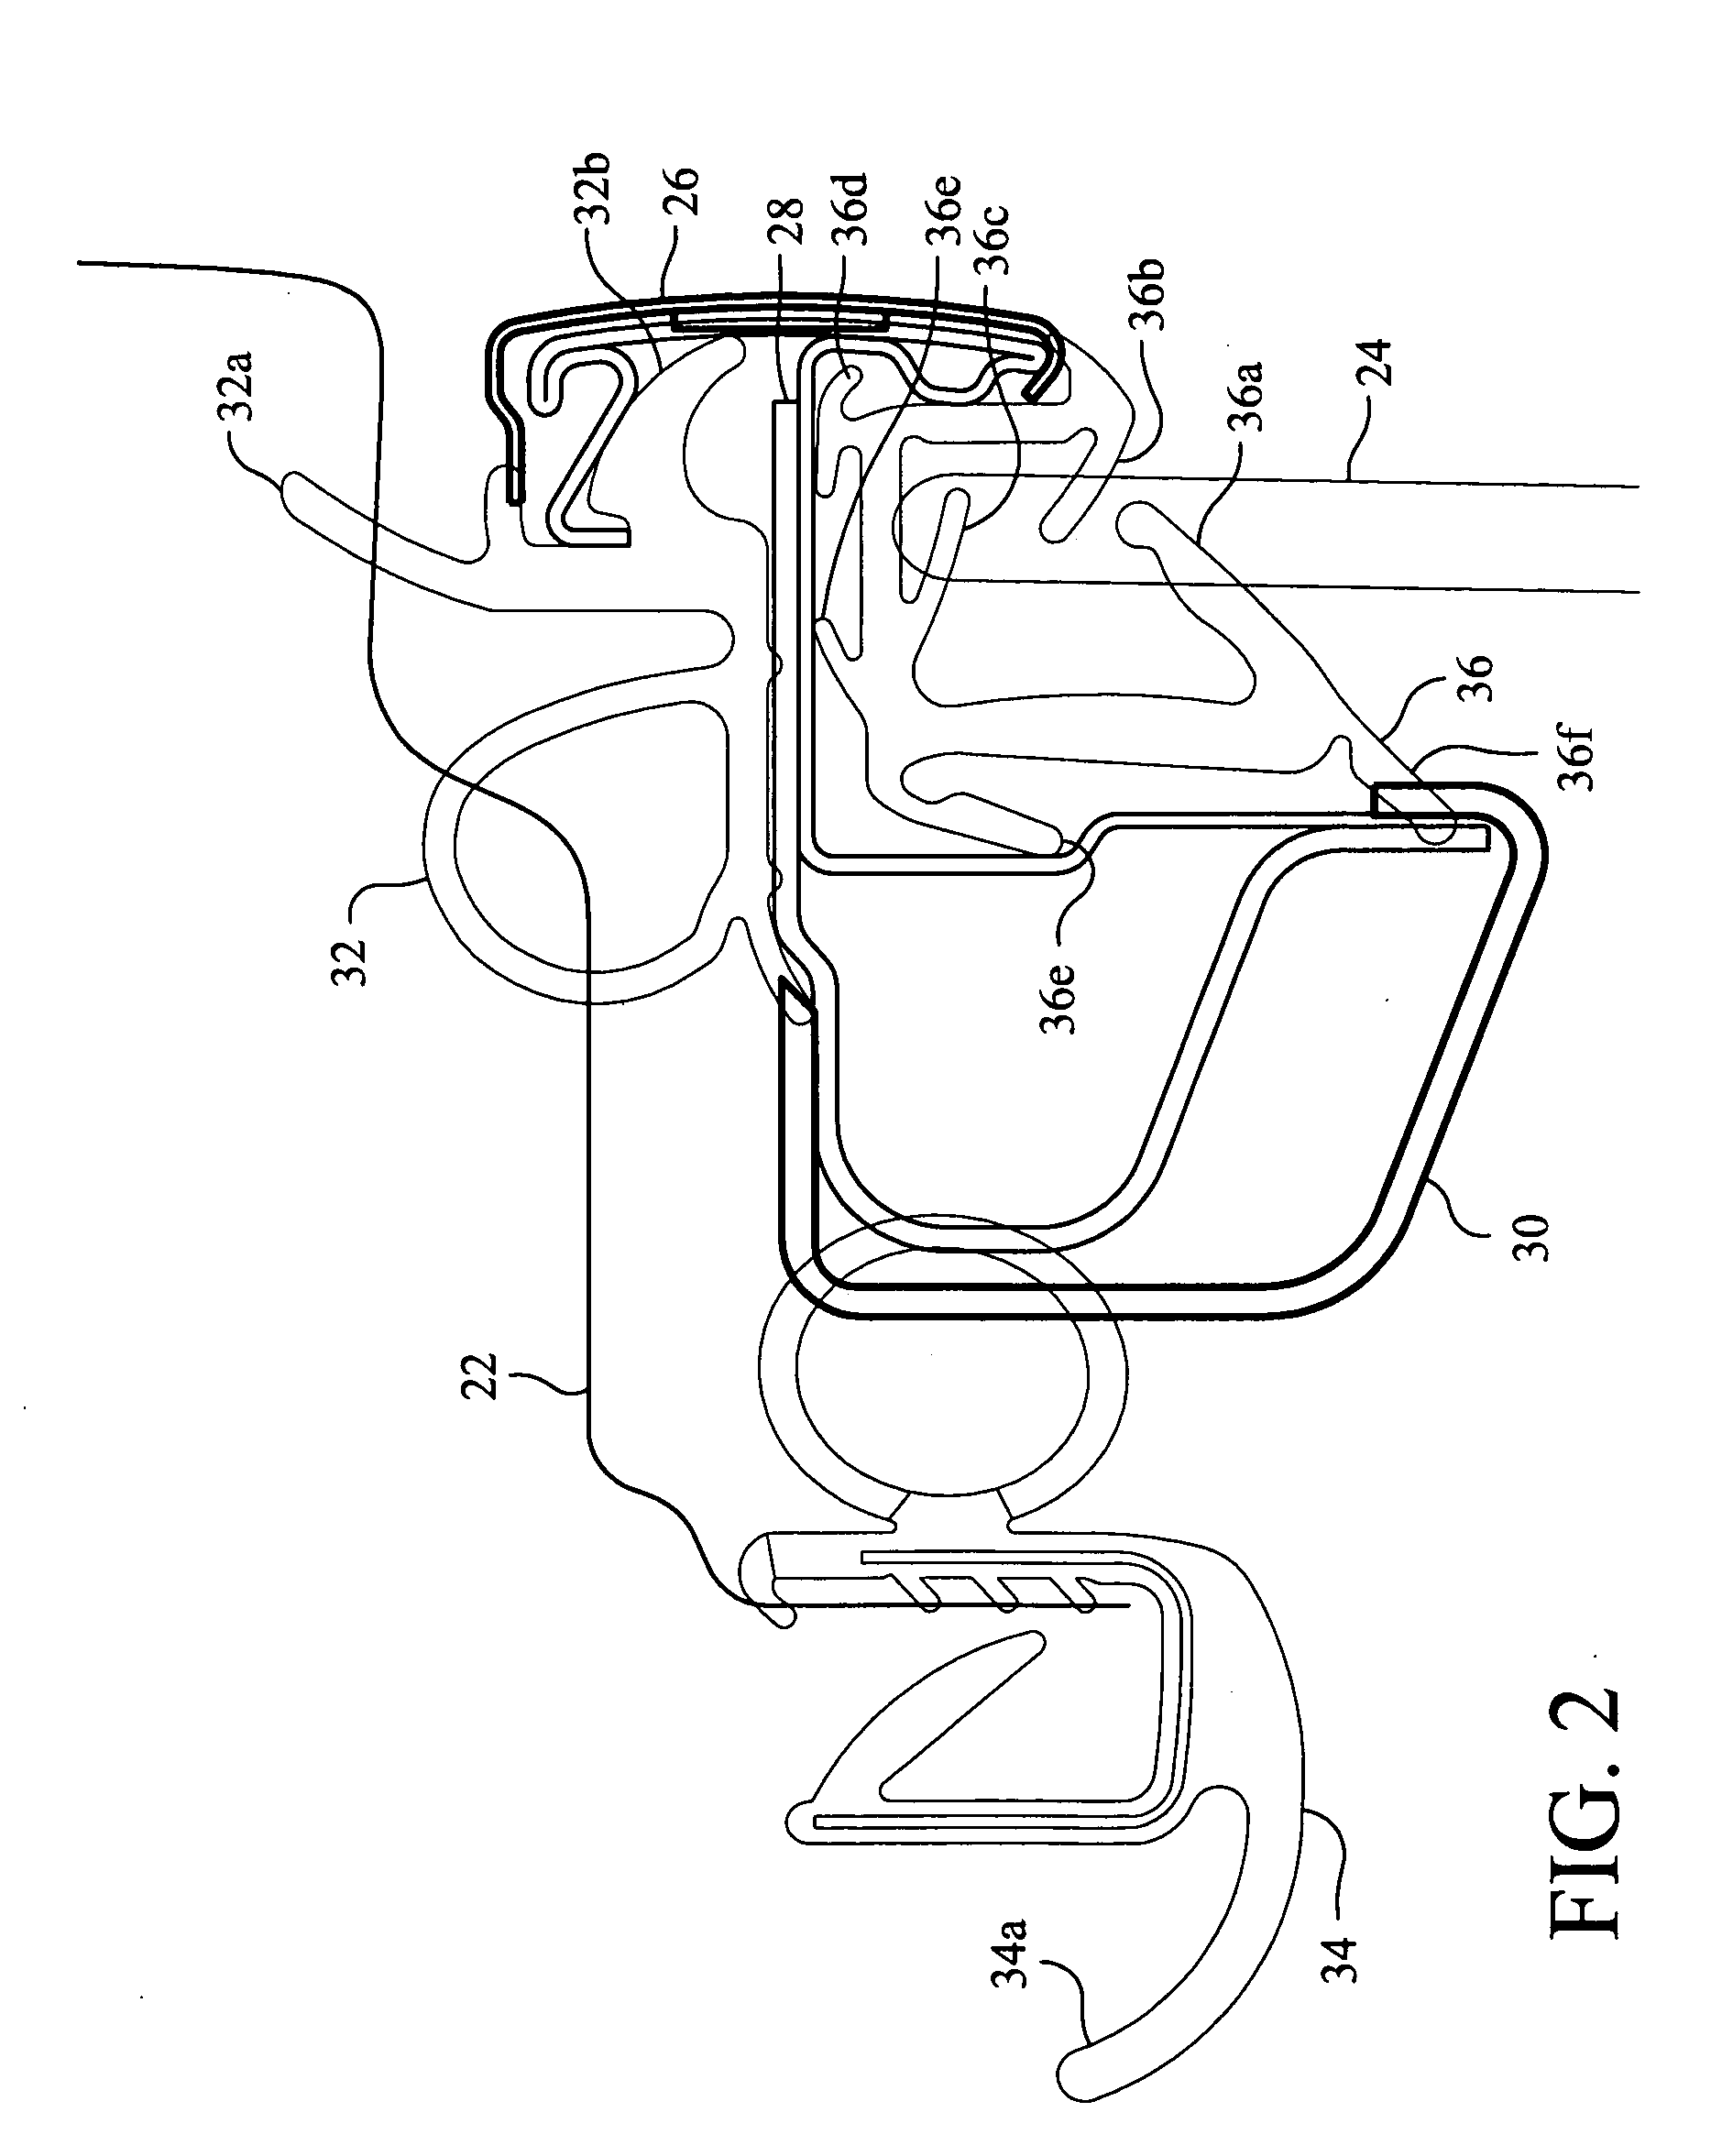 Vehicle seal system, and/or method of making the same